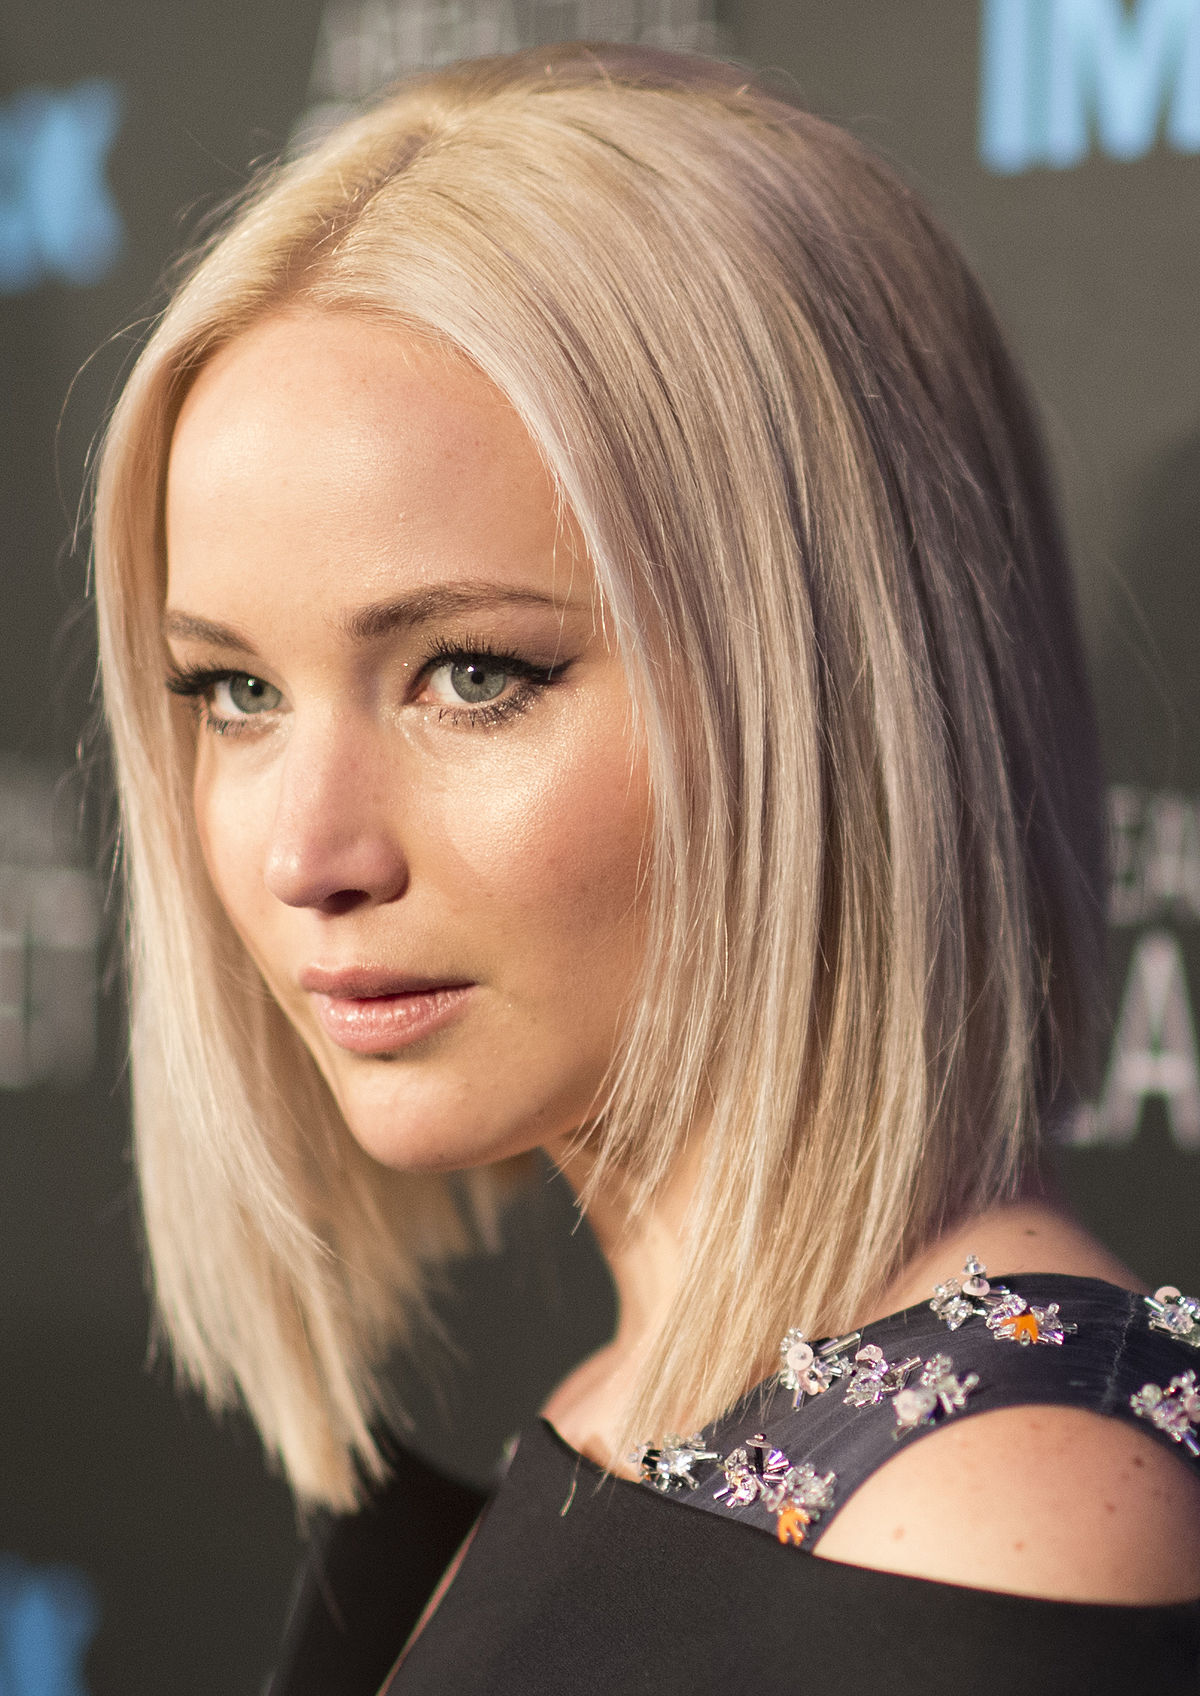 In which movie did Jennifer Lawrence play a character who is forced to work as a spy for the Russian government?